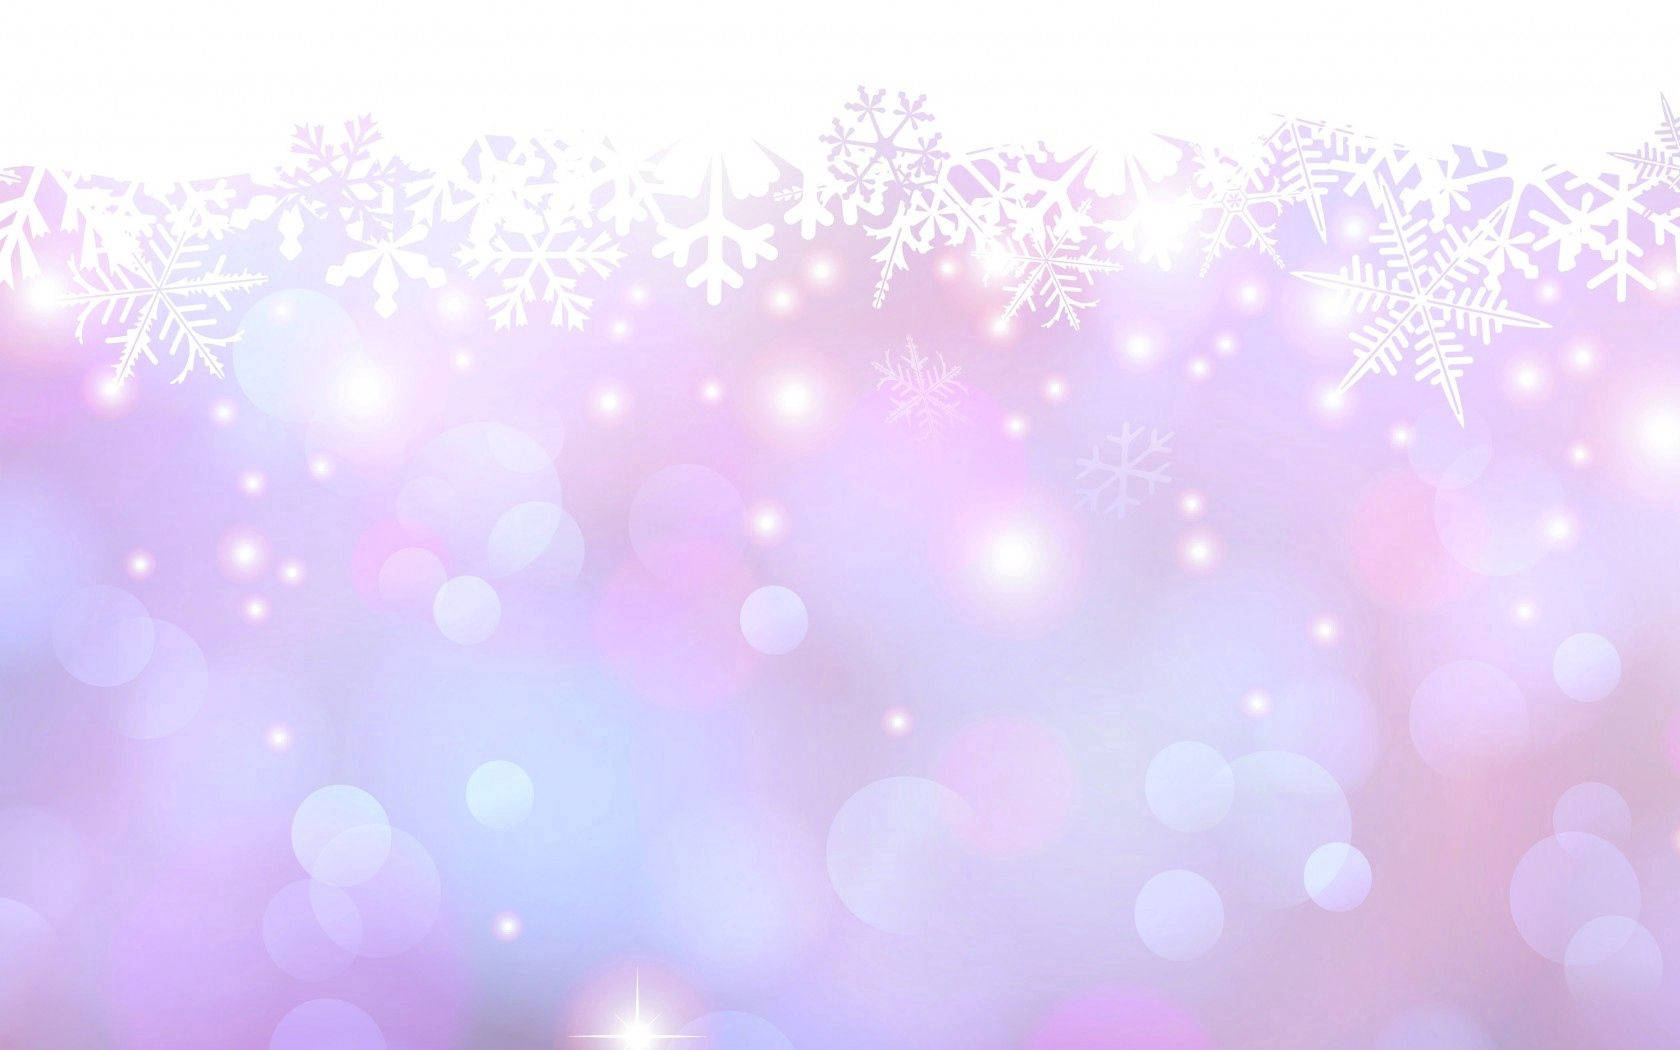 Glowing Snowflakes In Pink Background